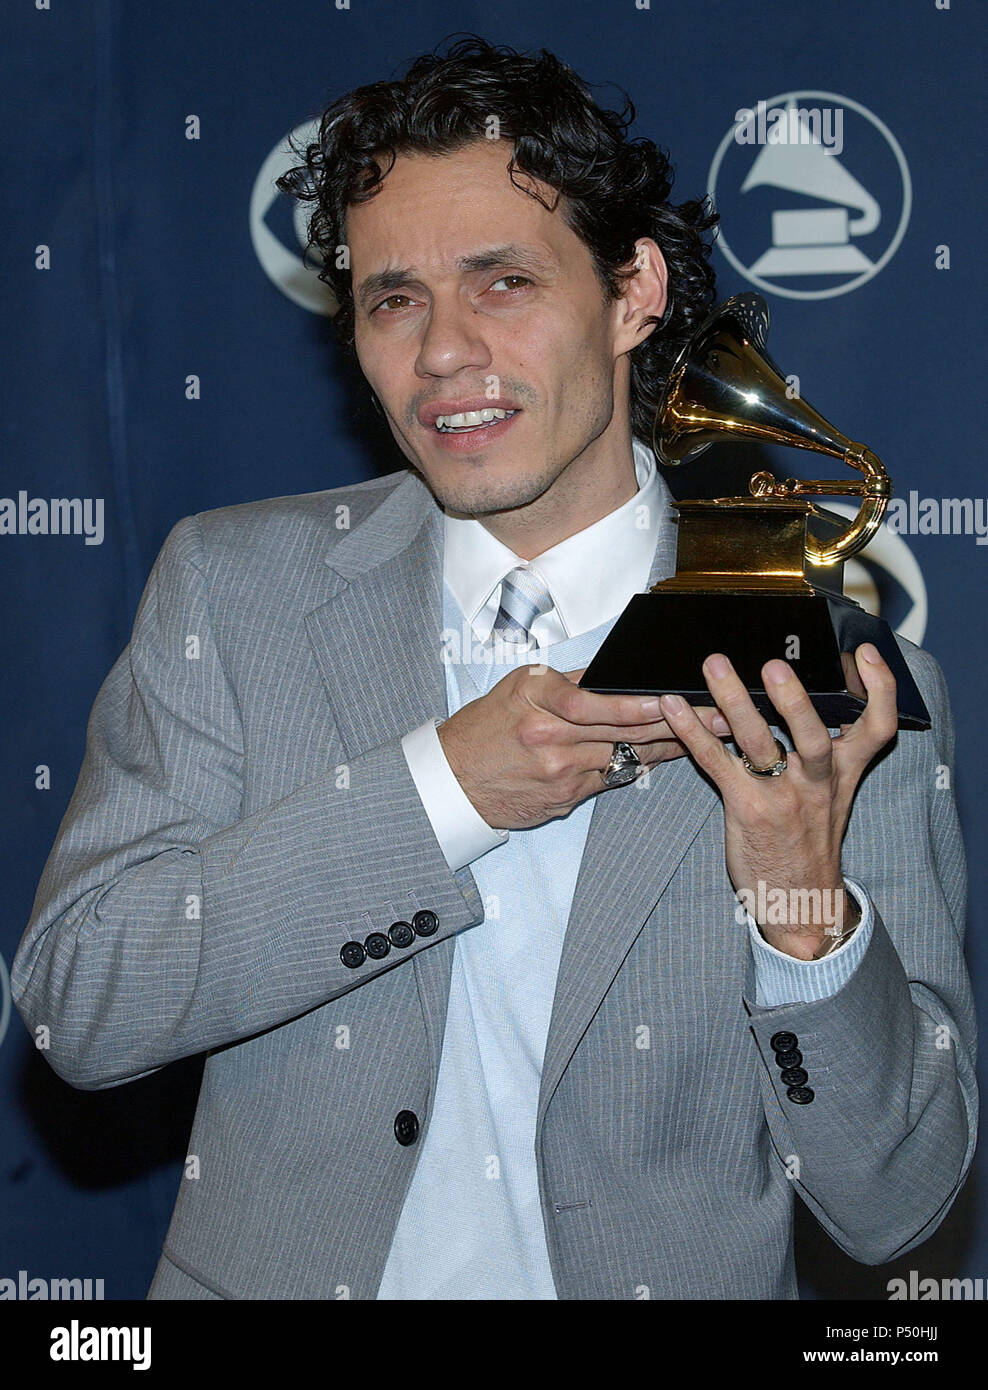 Marc Anthony backstage at the 47th Annual Grammy Awards at the Staple